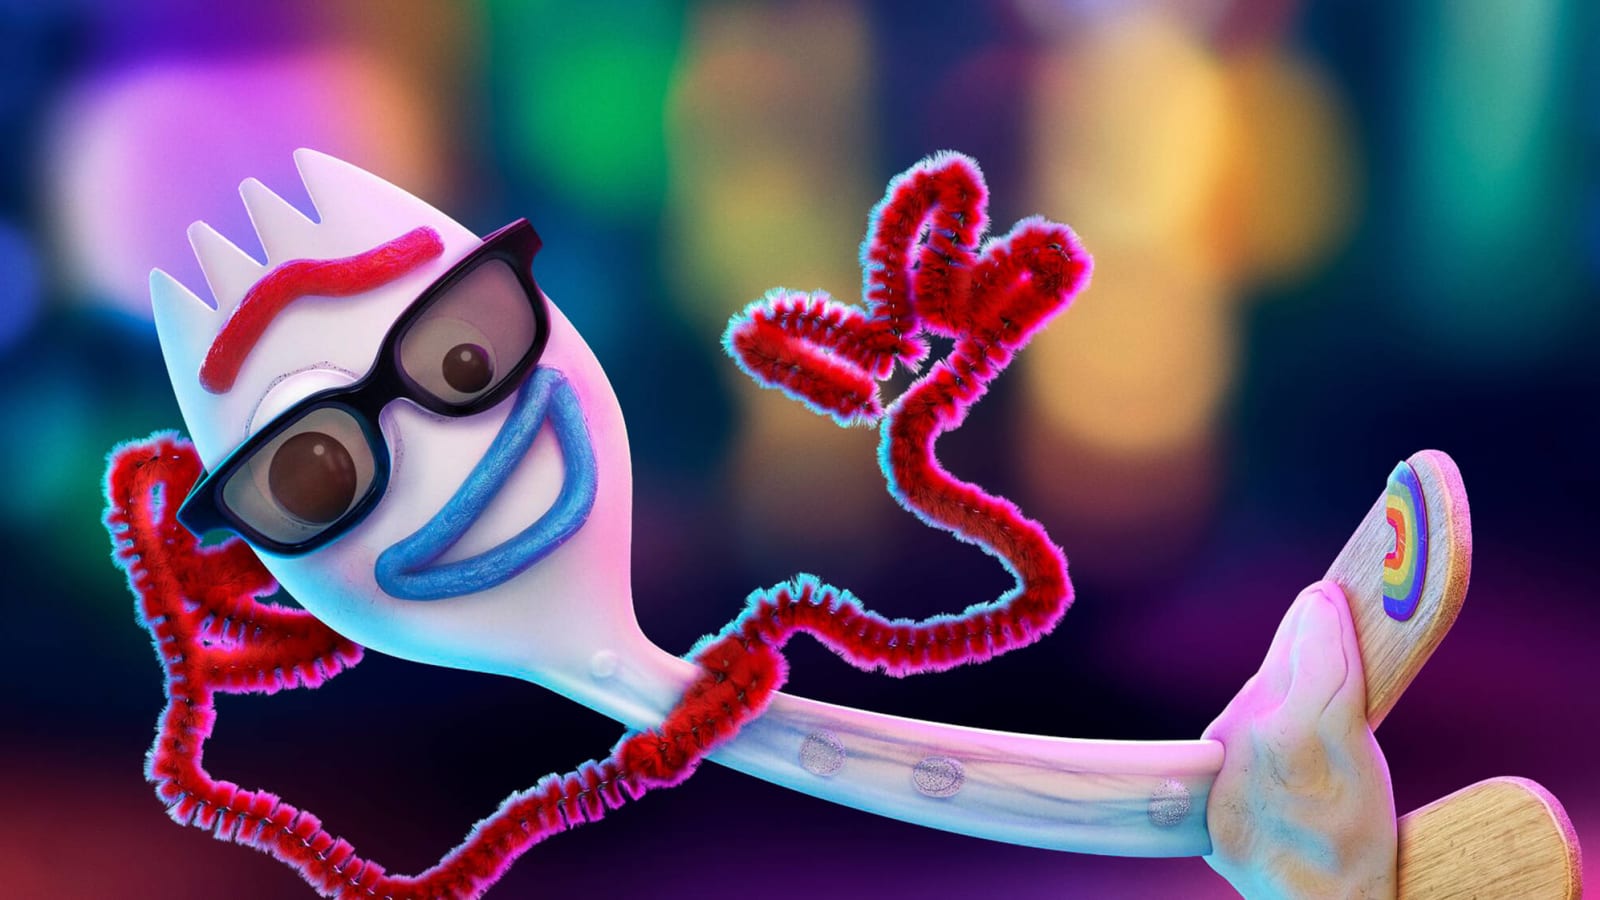 Forky From Toy Story 4 Is Already The Most Relatable Character